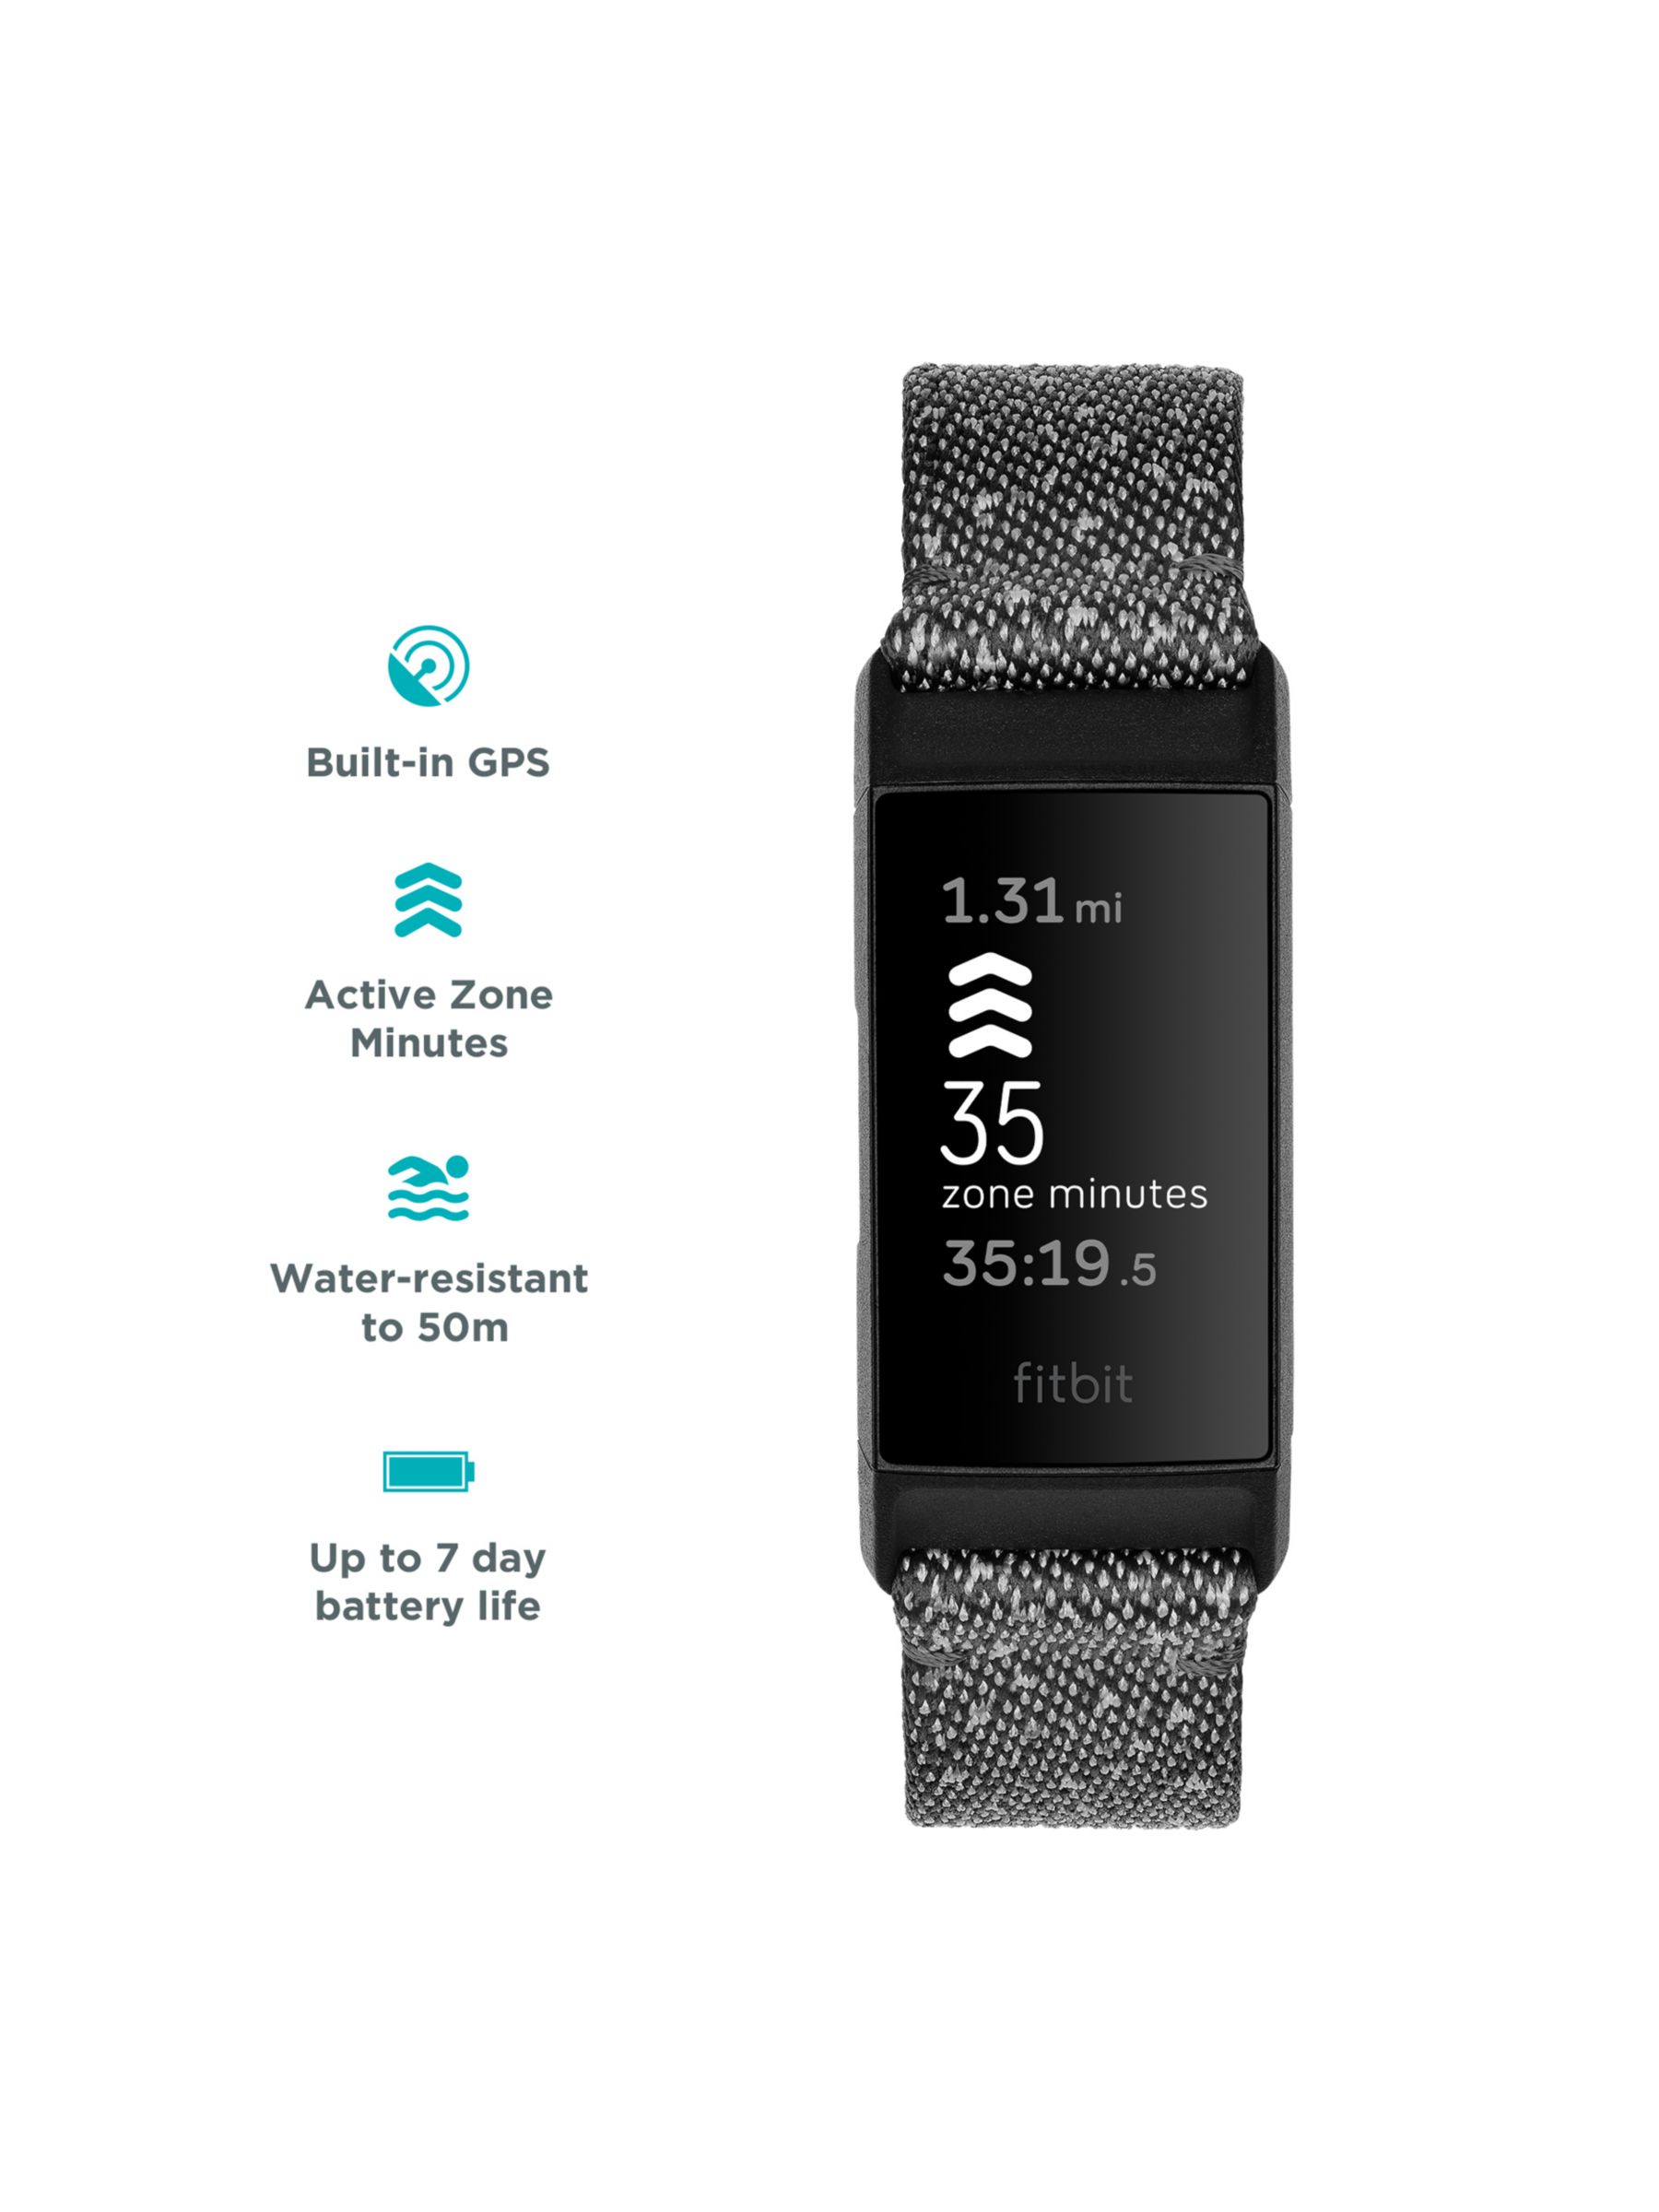 fitbit apps charge 4